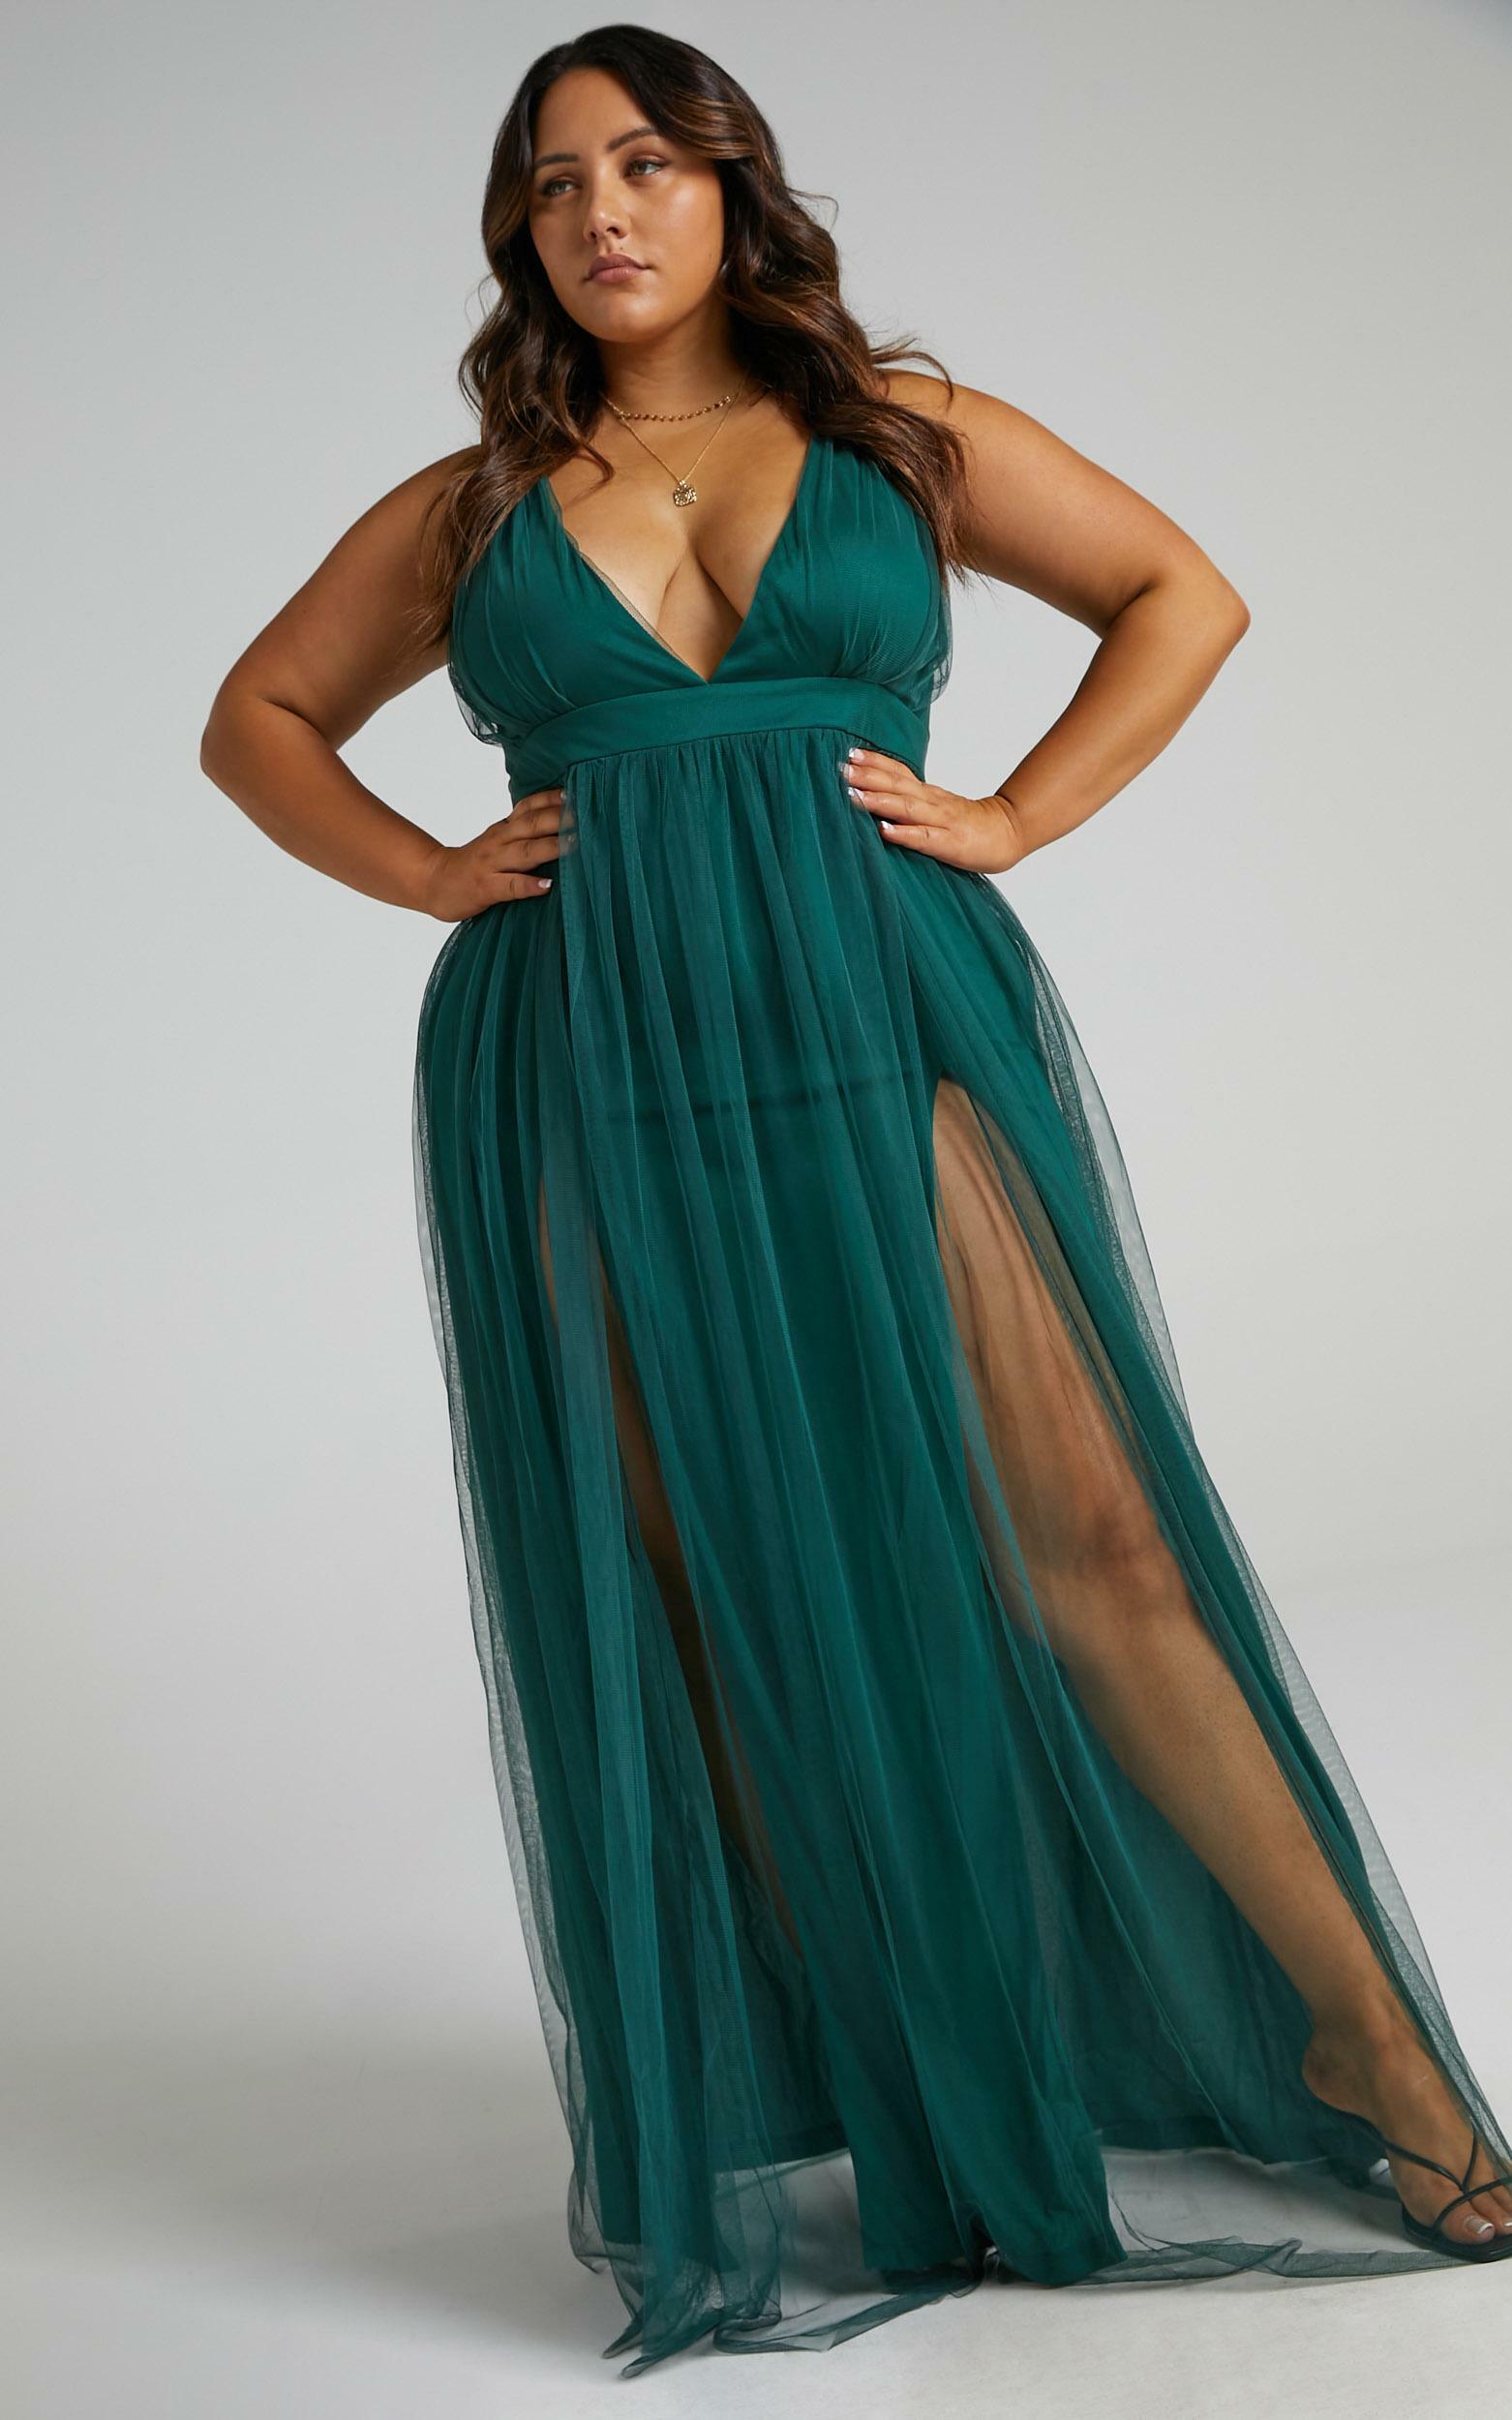 Like A Vision Plunge Maxi Dress in Emerald Tulle - 20, GRN3, hi-res image number null